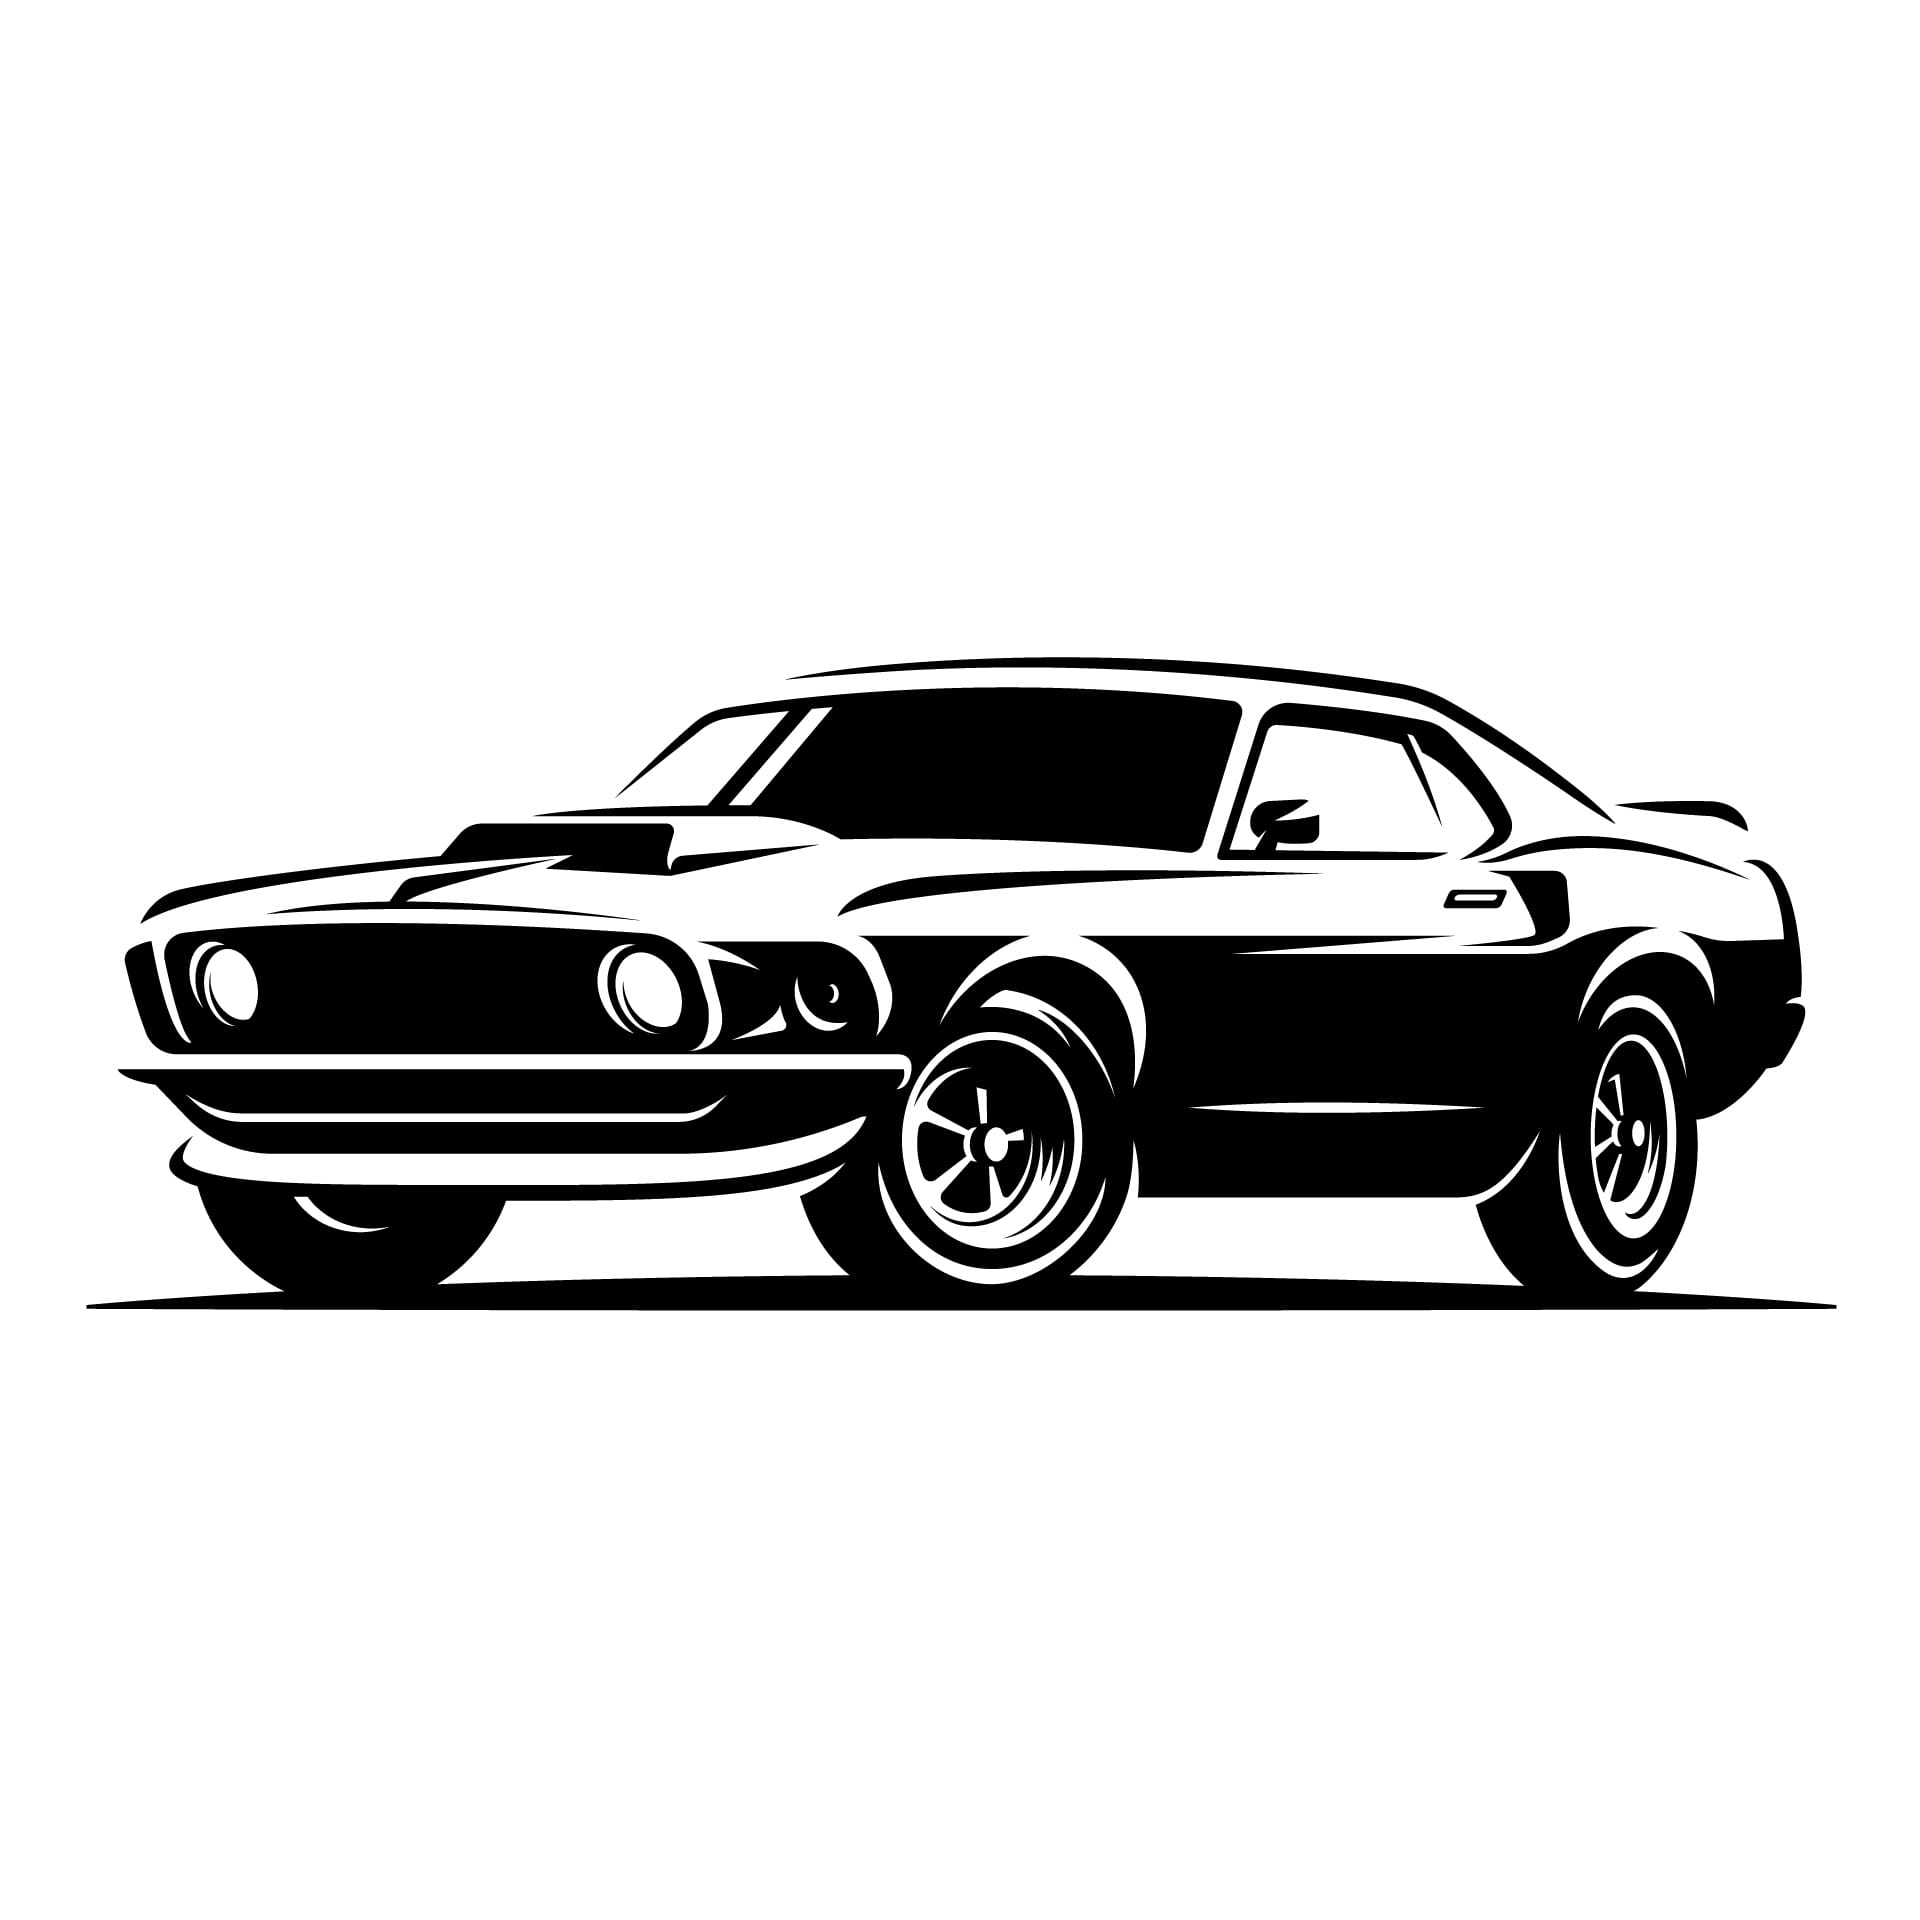 Car profile picture muscle car illustrations image